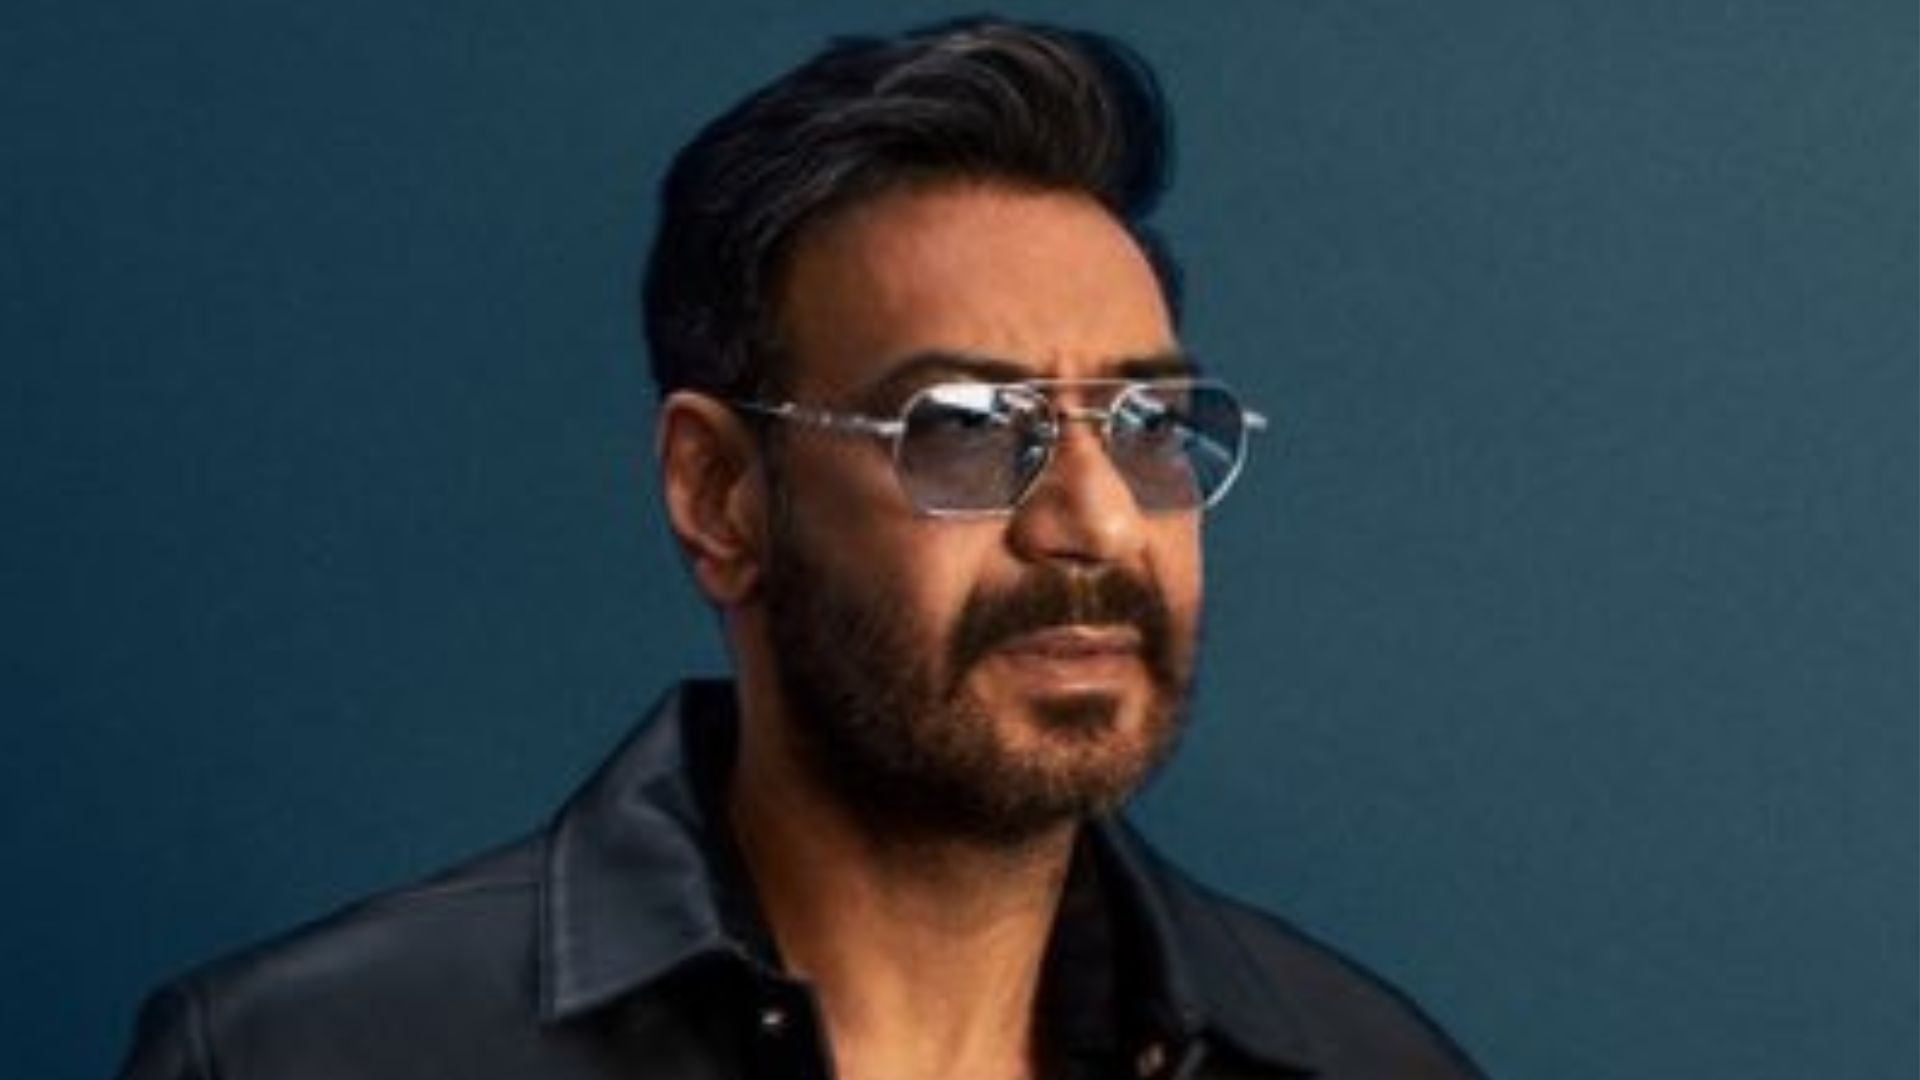 Ajay Devgn is set to feature in the upcoming film by Jagan Shakti, the director of Mission Mangal.